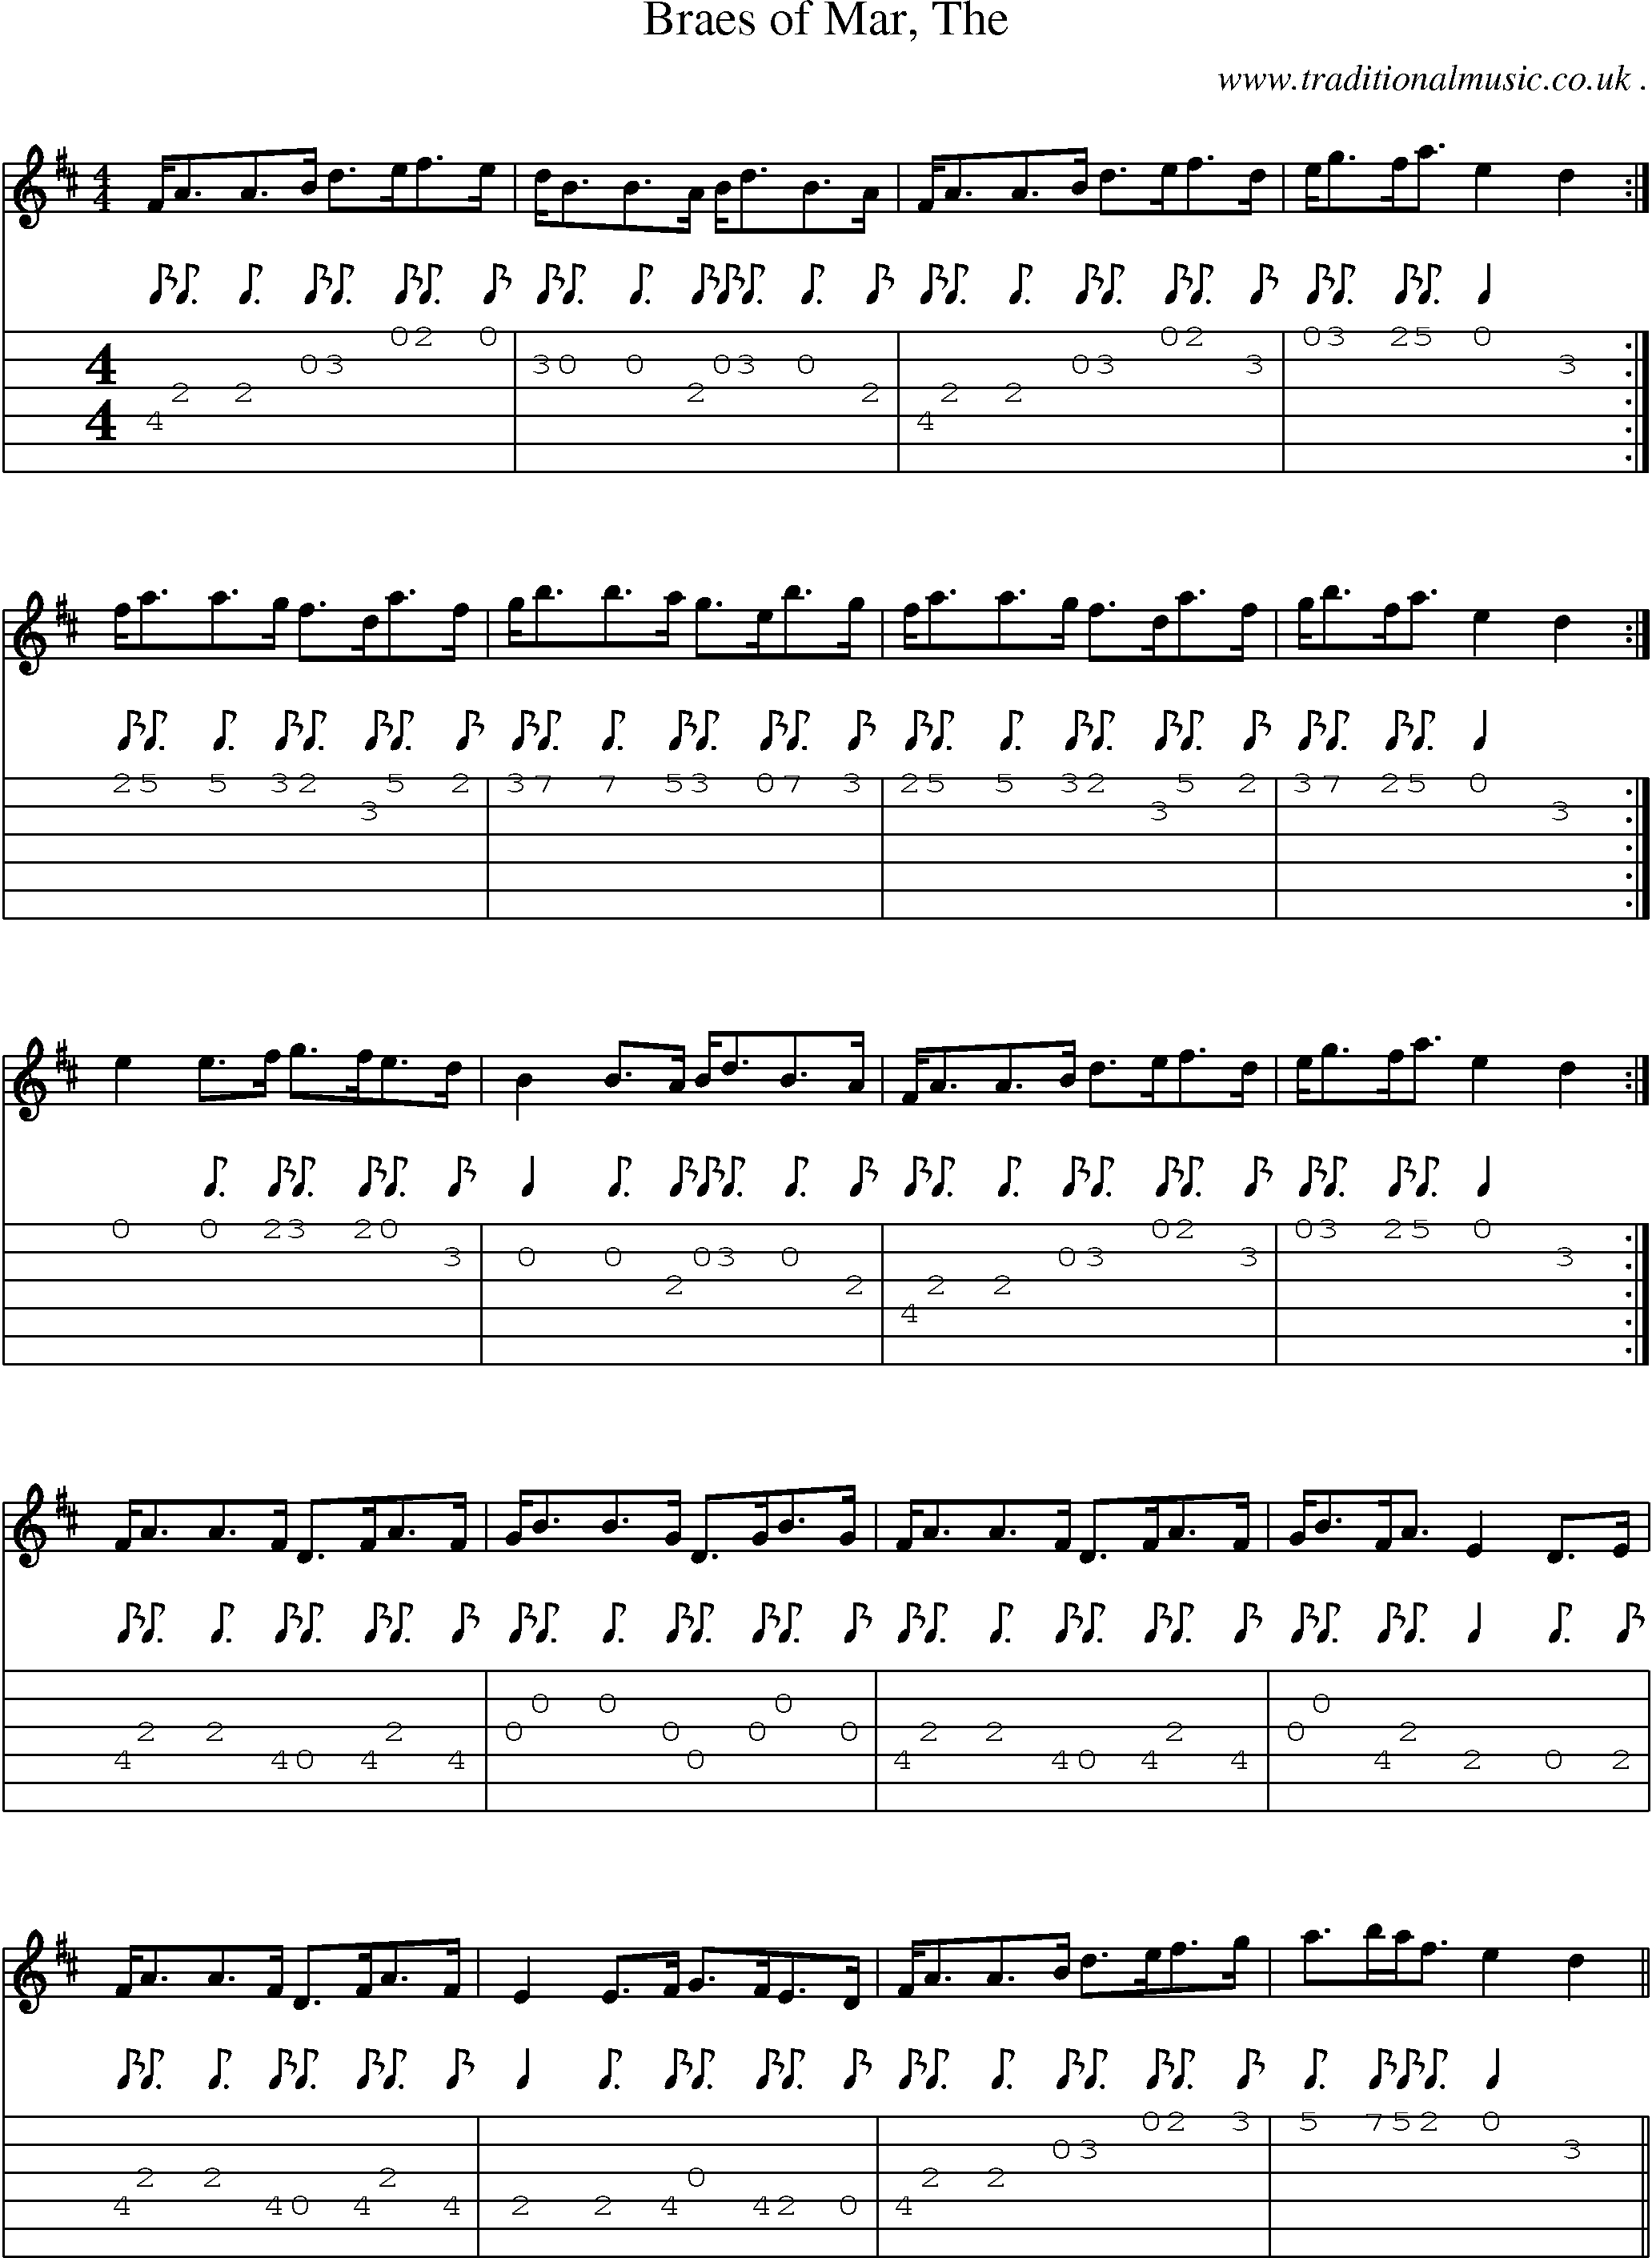 Sheet-music  score, Chords and Guitar Tabs for Braes Of Mar The